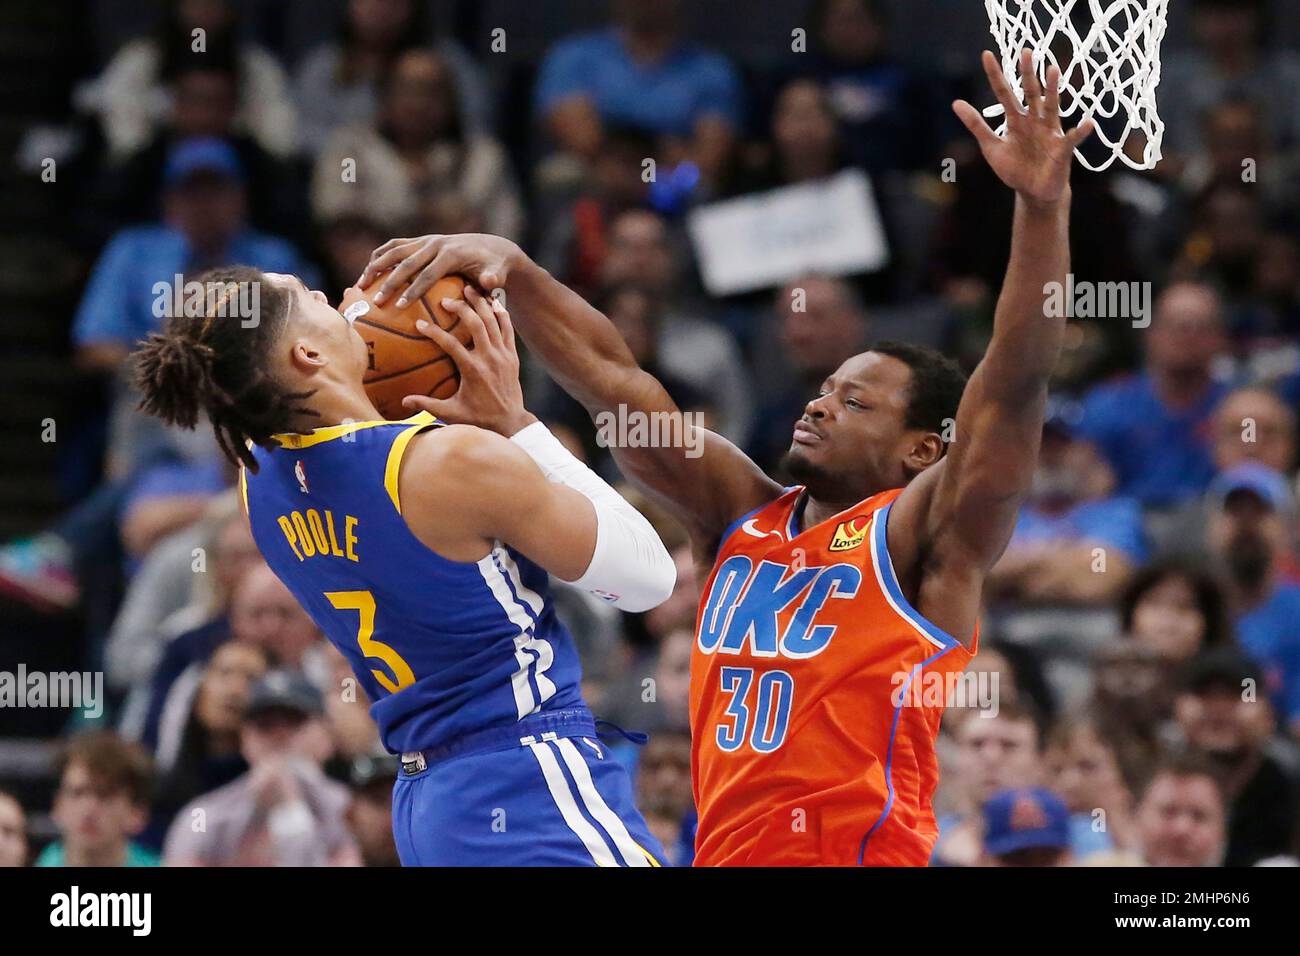 Oklahoma City Thunder guard Deonte Burton (30) gets his hand on the ball  and forces a jump ball with Golden State Warriors guard Jordan Poole, left,  in the second half of an